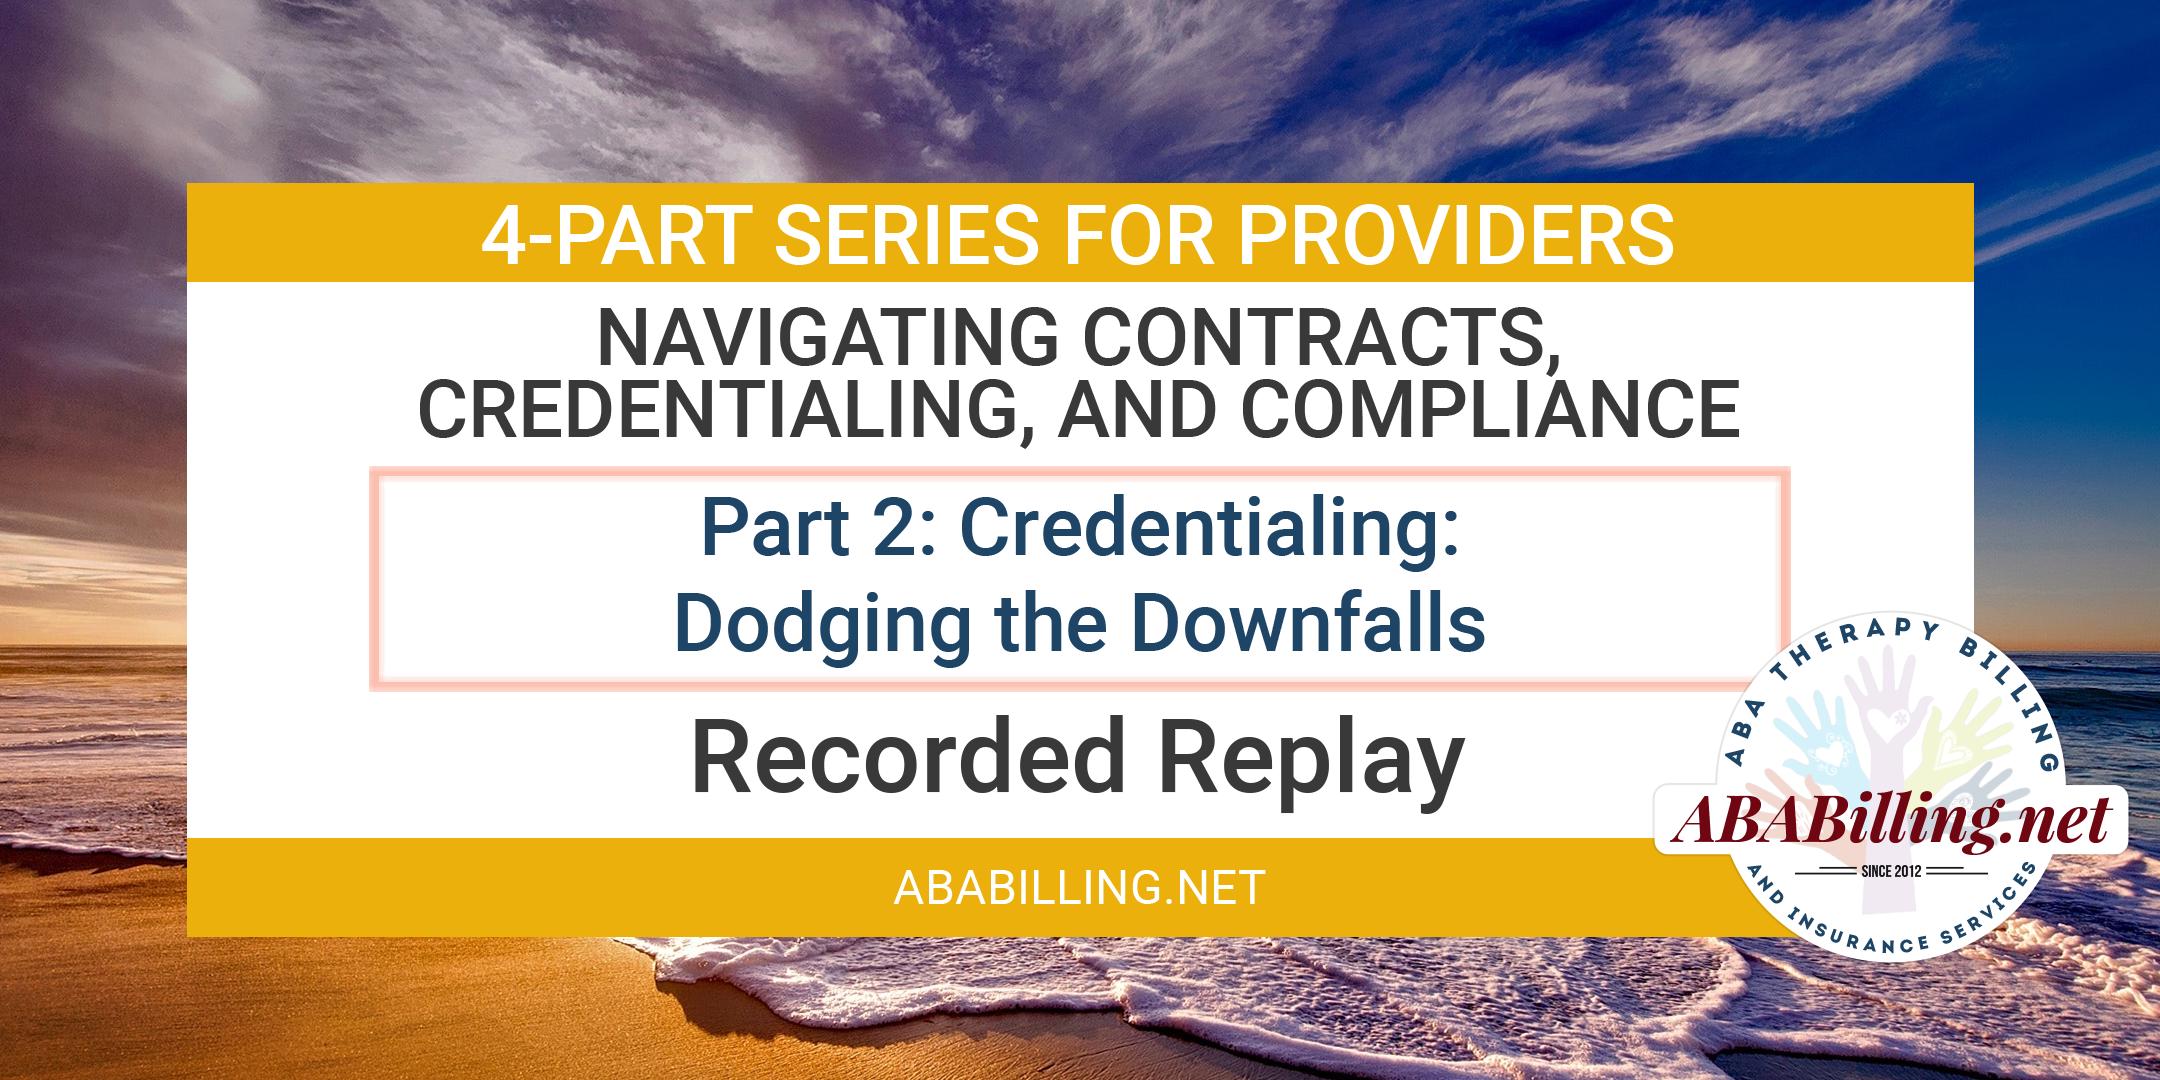 Webinar: Navigating Contracts, Credentialing, and Compliance Part 2: Credentialing: Dodging the Downfalls